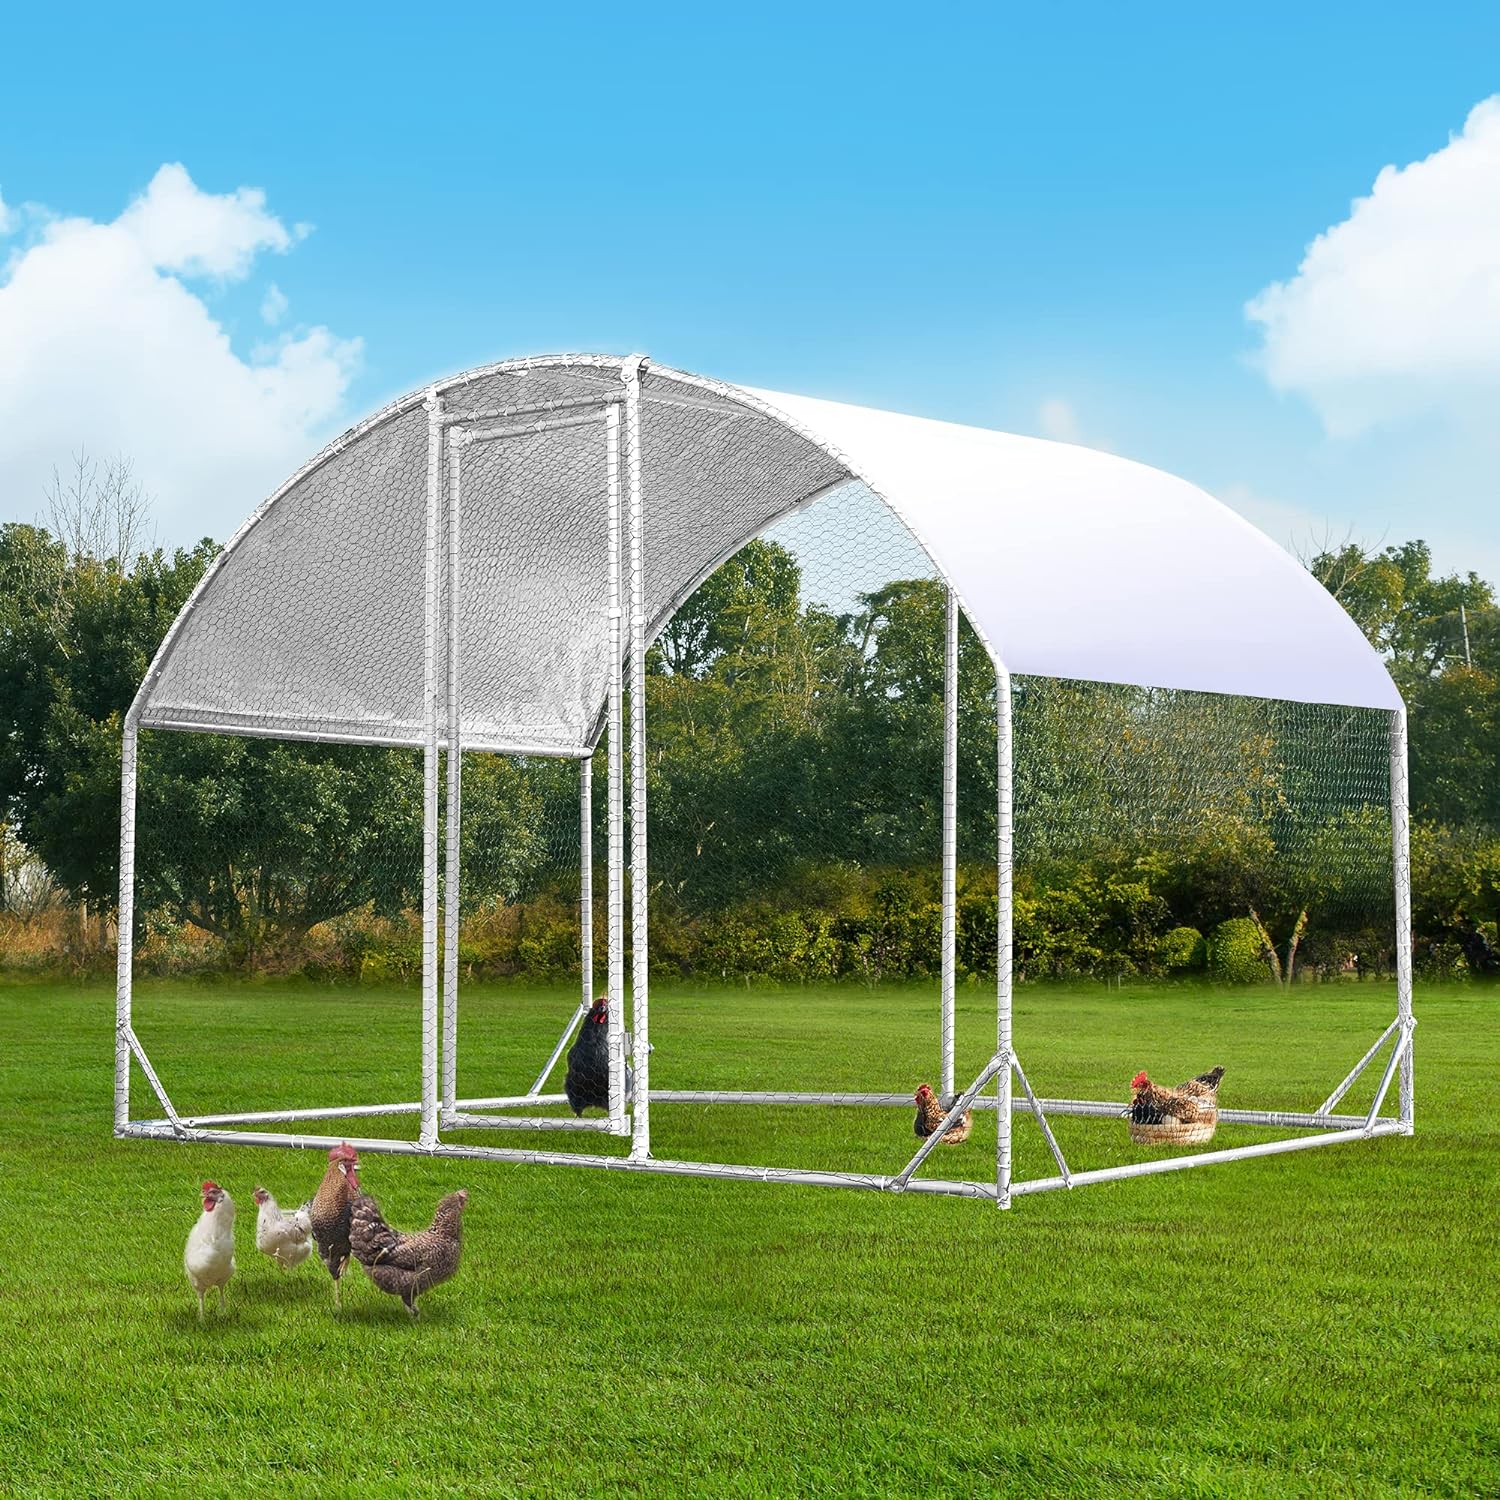 HABUTWAY Large Metal Chicken Coop,Chicken House for 6/10 Chickens,Chicken Run with Waterproof and Anti-Ultraviolet Cover,Dome Shaped Hen House add Steel Frames for Extra Stability 6.2'L*9.2'W*6.5'H